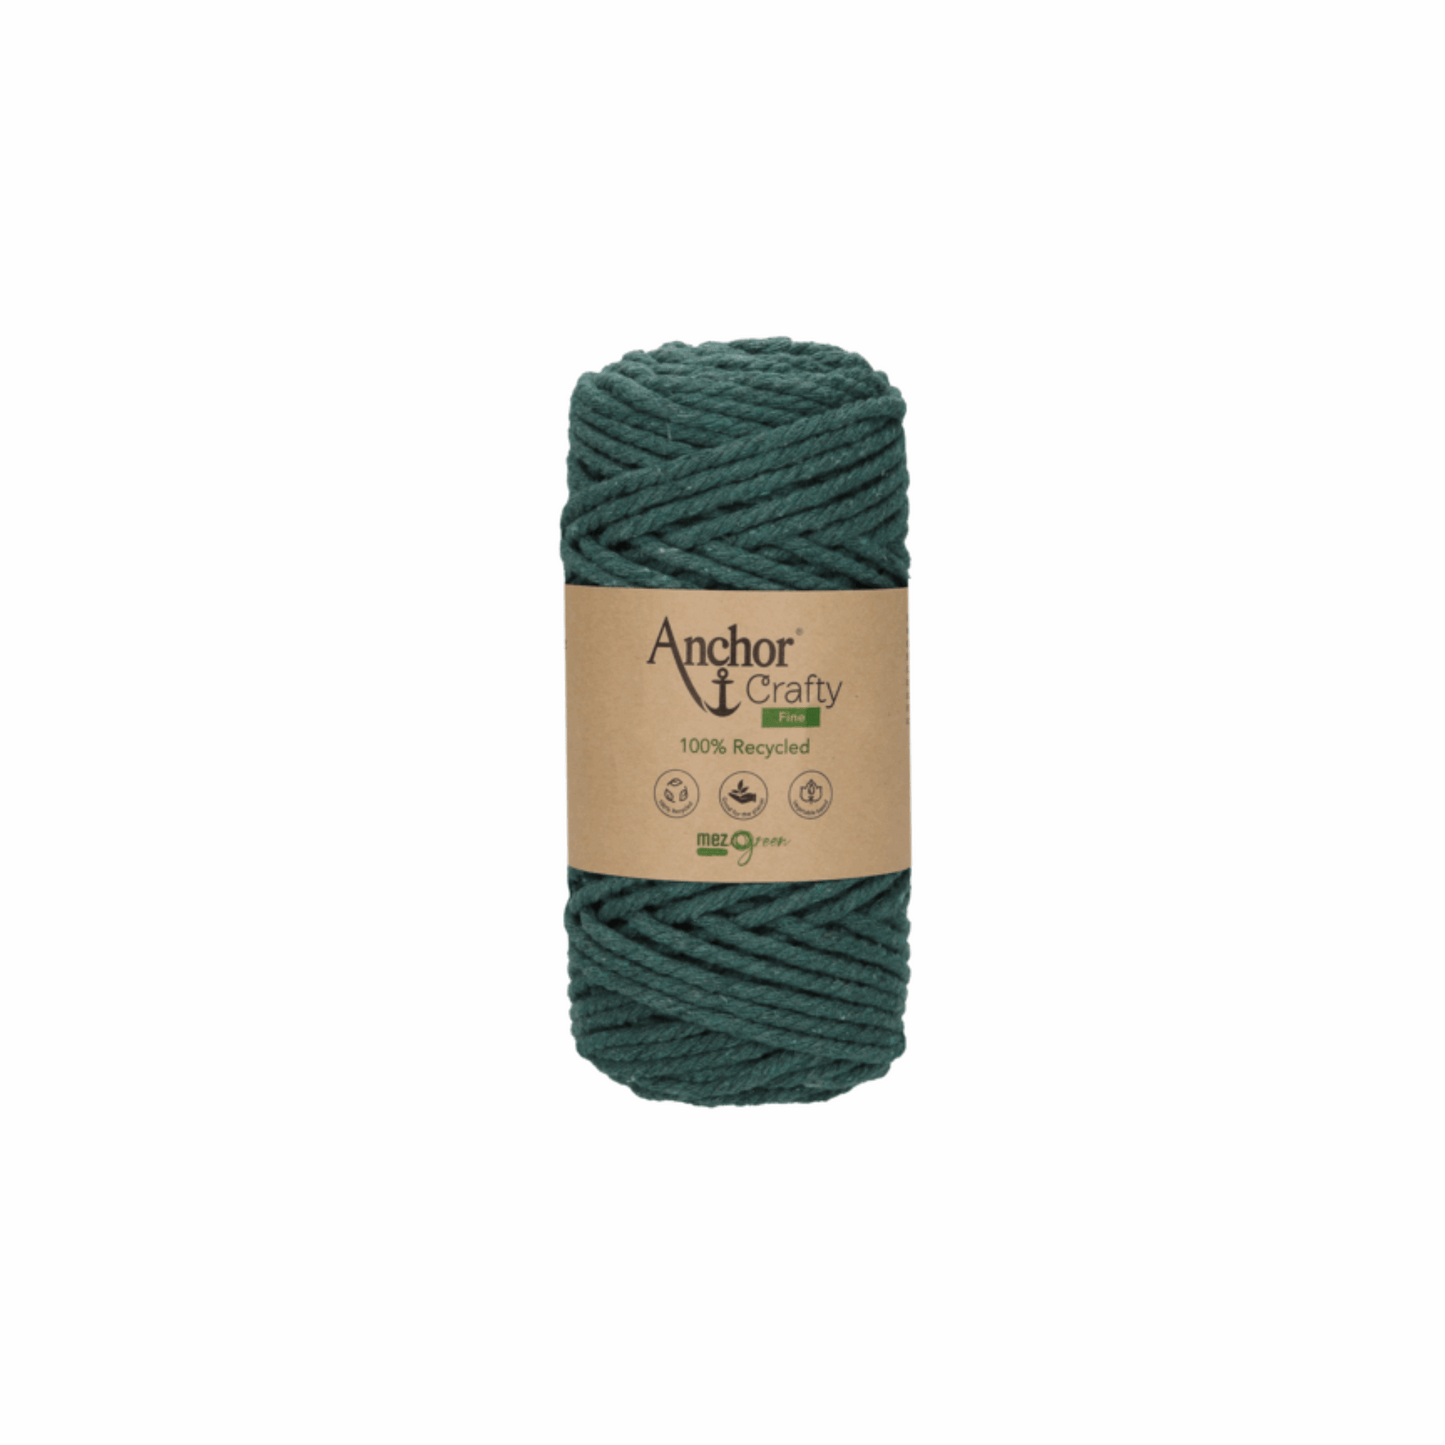 Anchor Crafty Makramee fine 3 mm, 250g, Farbe 111 forest